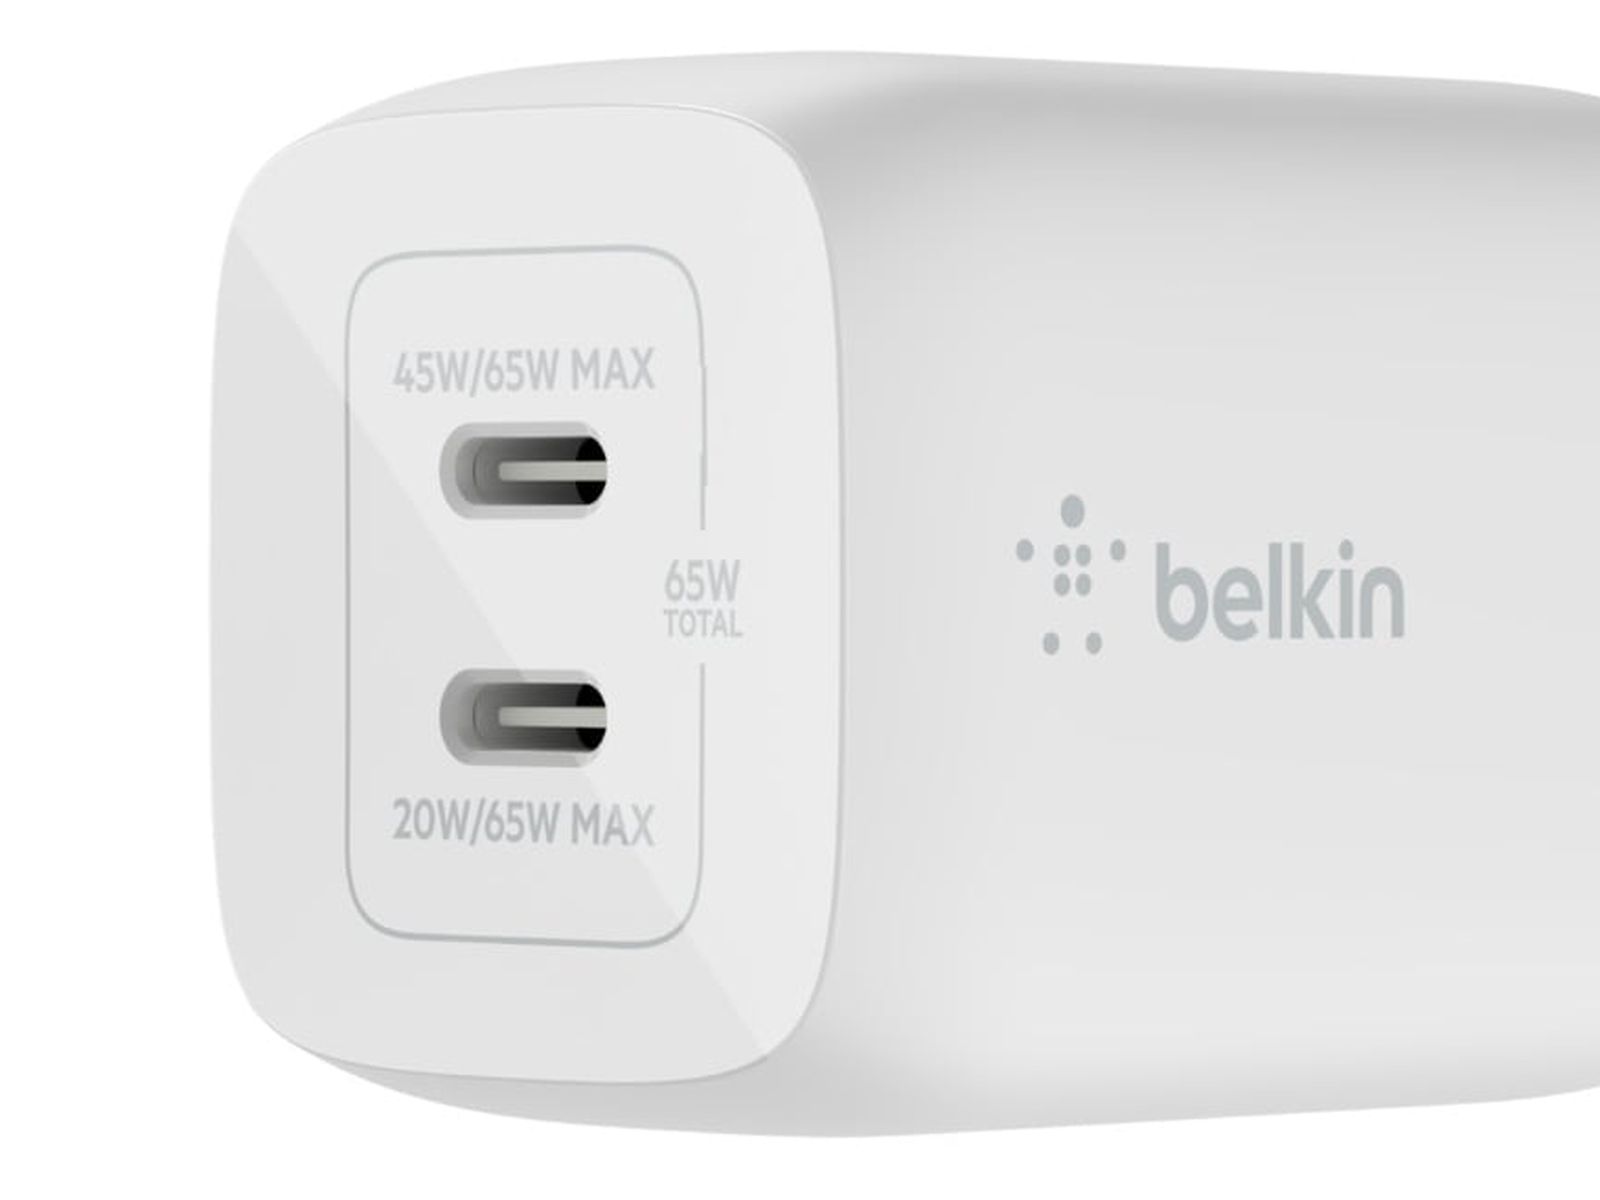 Review: Anker 65W 4 Port USB-C Wall Charger